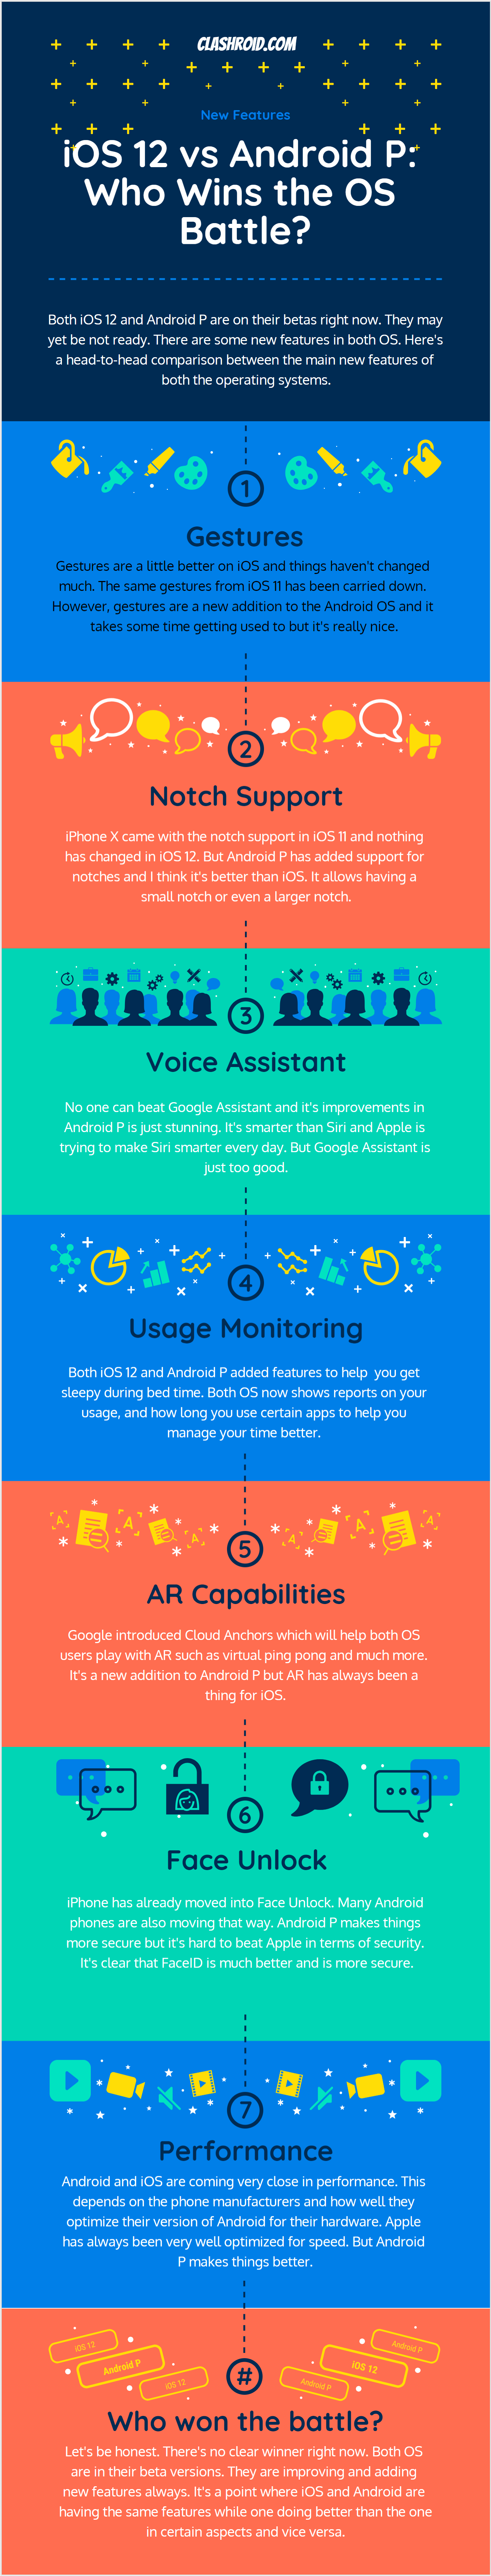 iOS 12 vs Android P Infographic, iOS 12 vs Android P, Compare iOS 12 and Android P, Android P vs iOS 12 Beta, Android P Features, iOS 12 Features